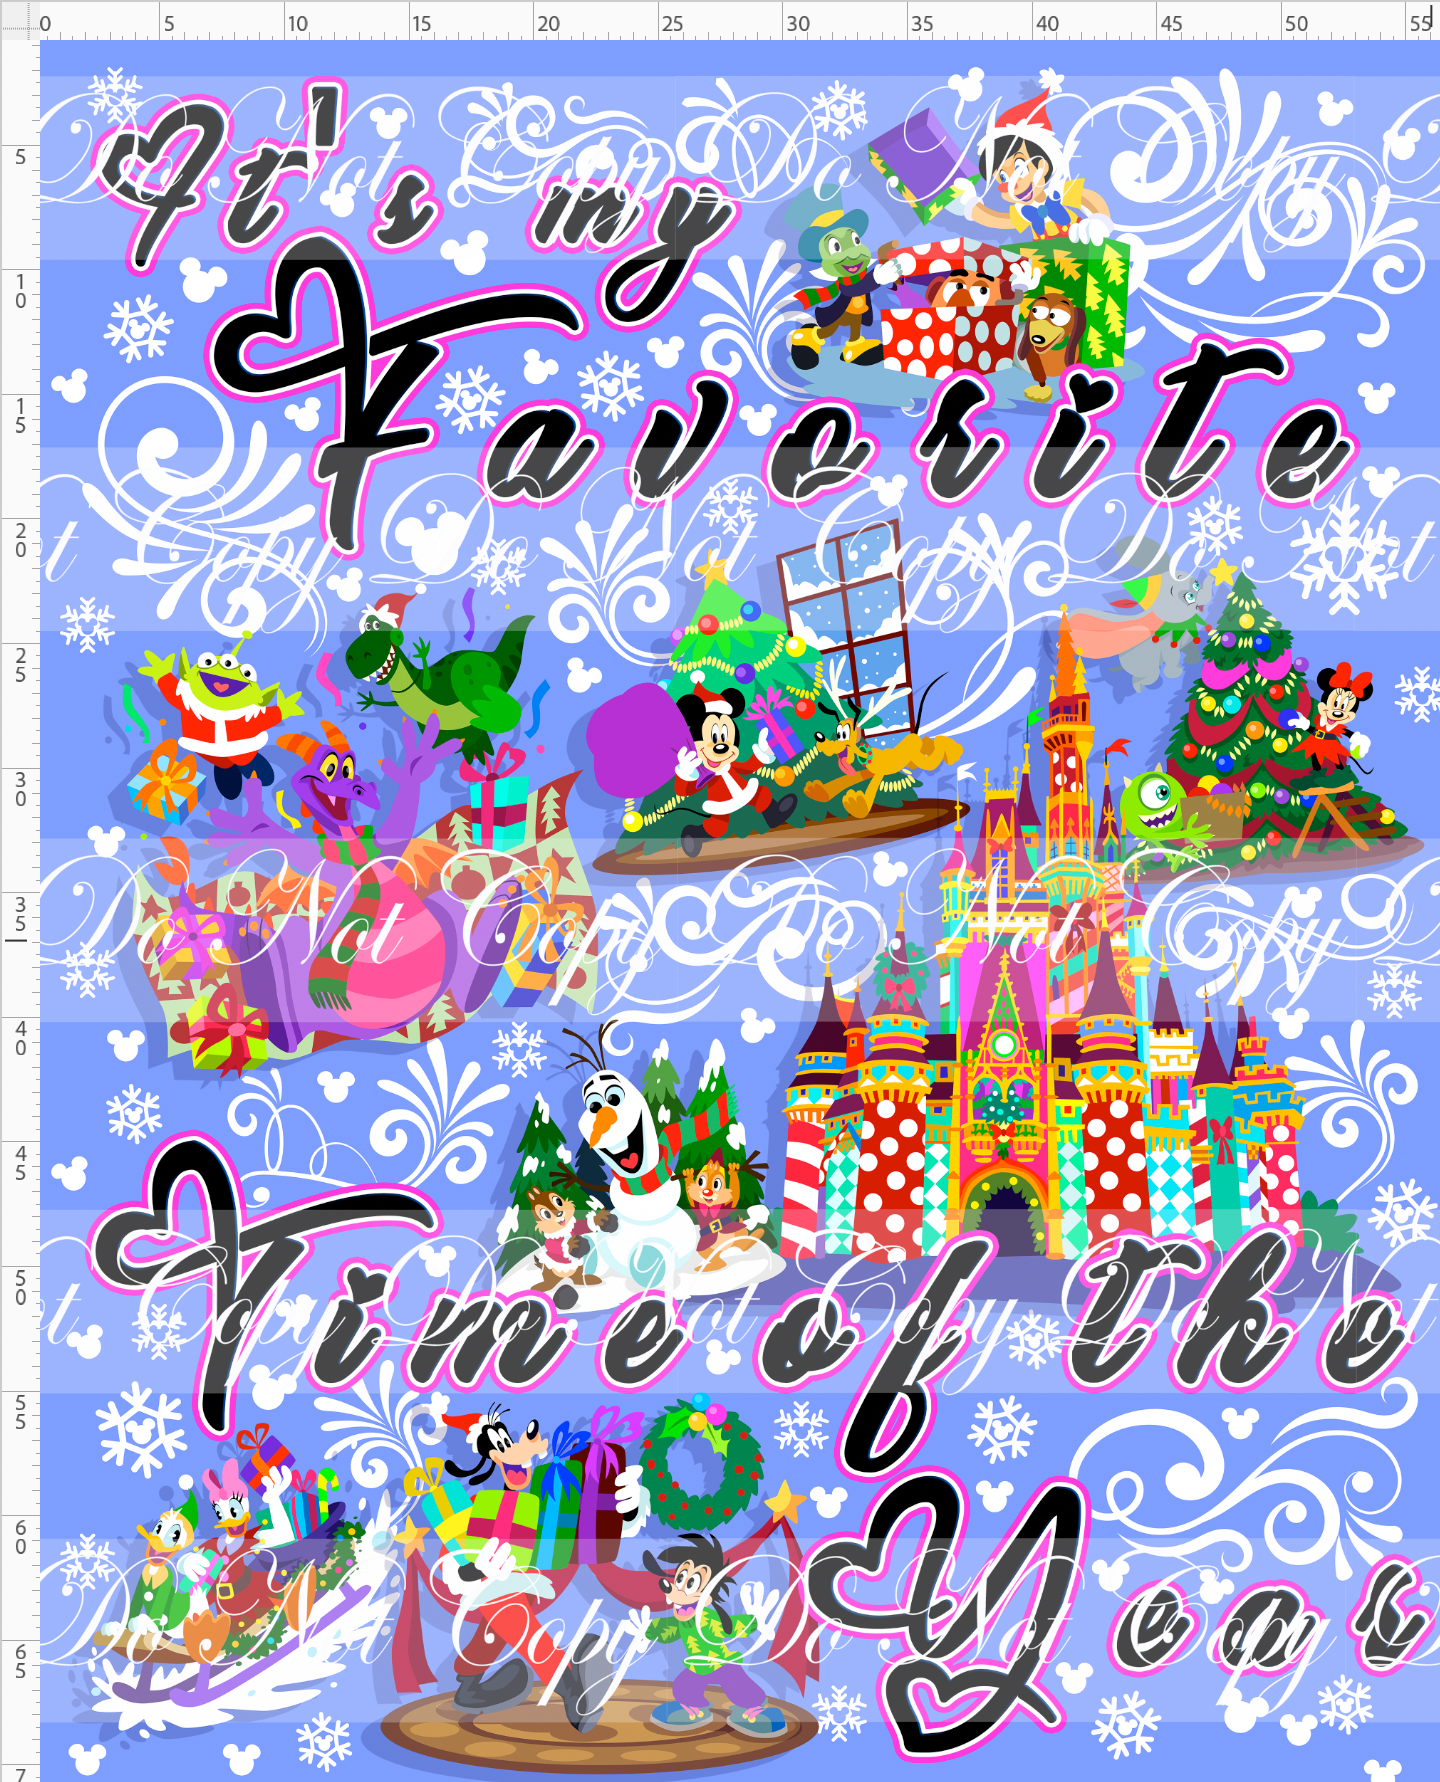 CATALOG - PREORDER - My Favorite Time of the Year - Adult Blanket Topper - Cornflower